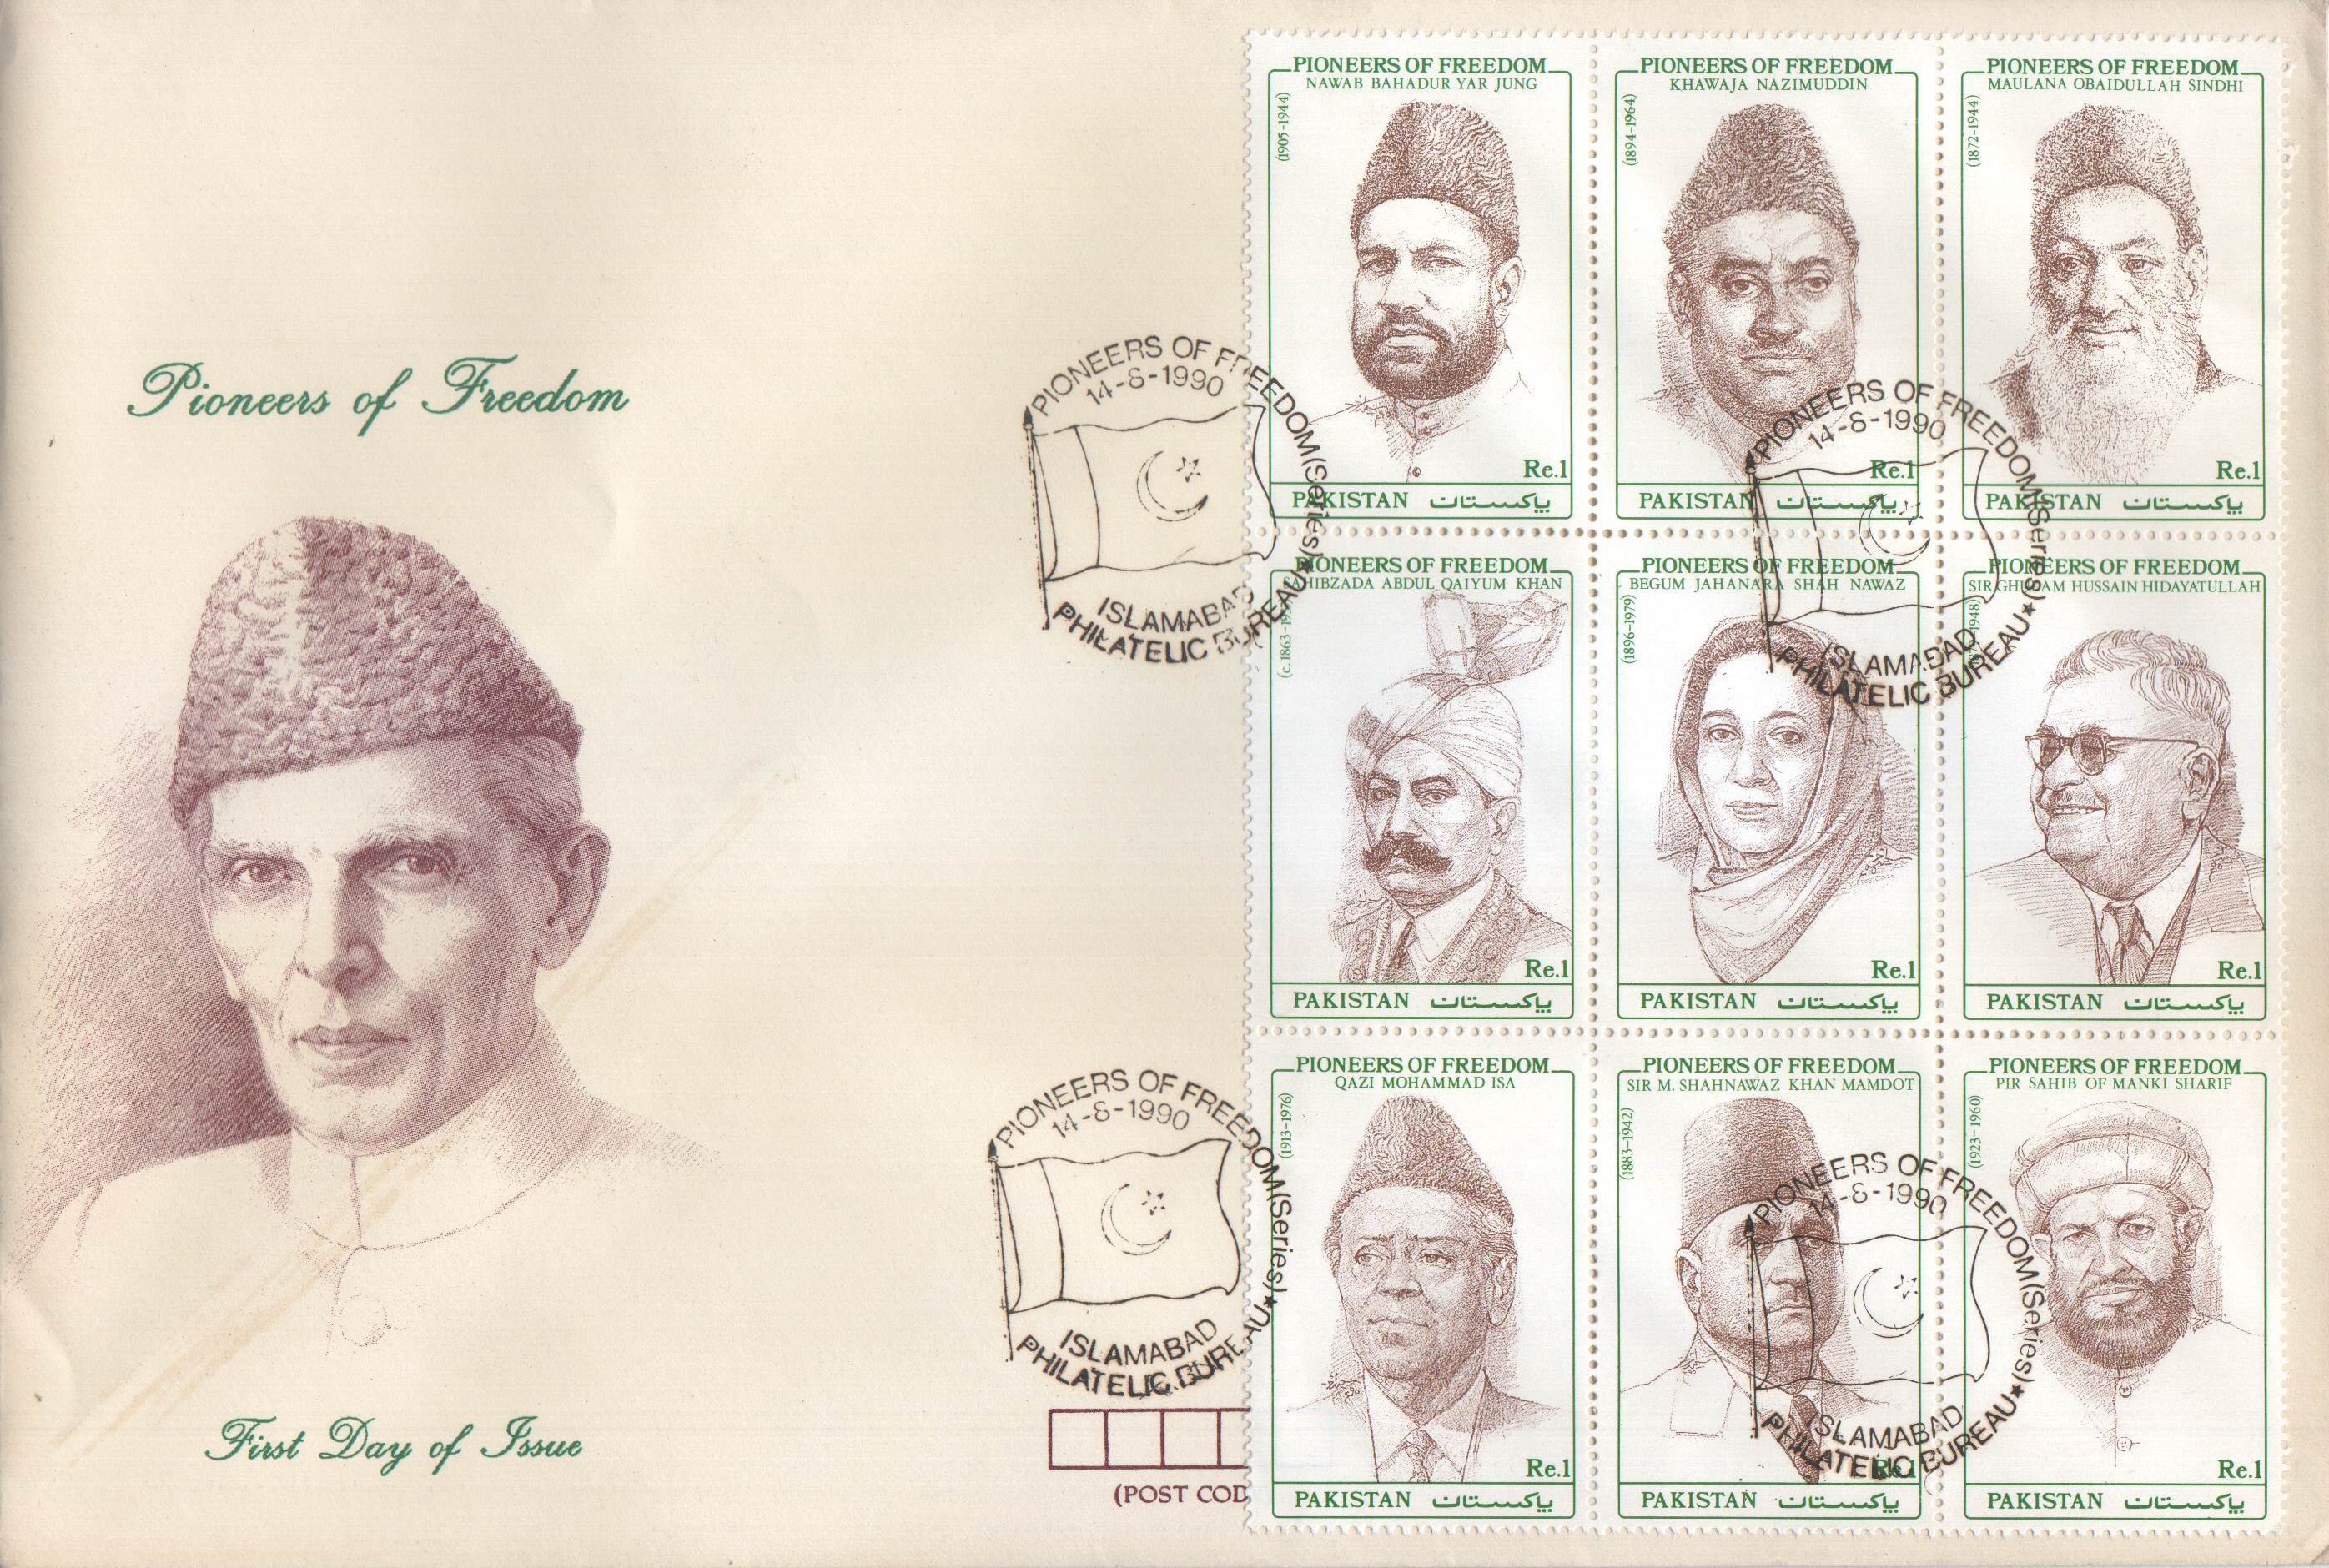 Pakistan Fdc 1990 & Stamps Pioneers of Freedom Series Aga Khan - Click Image to Close